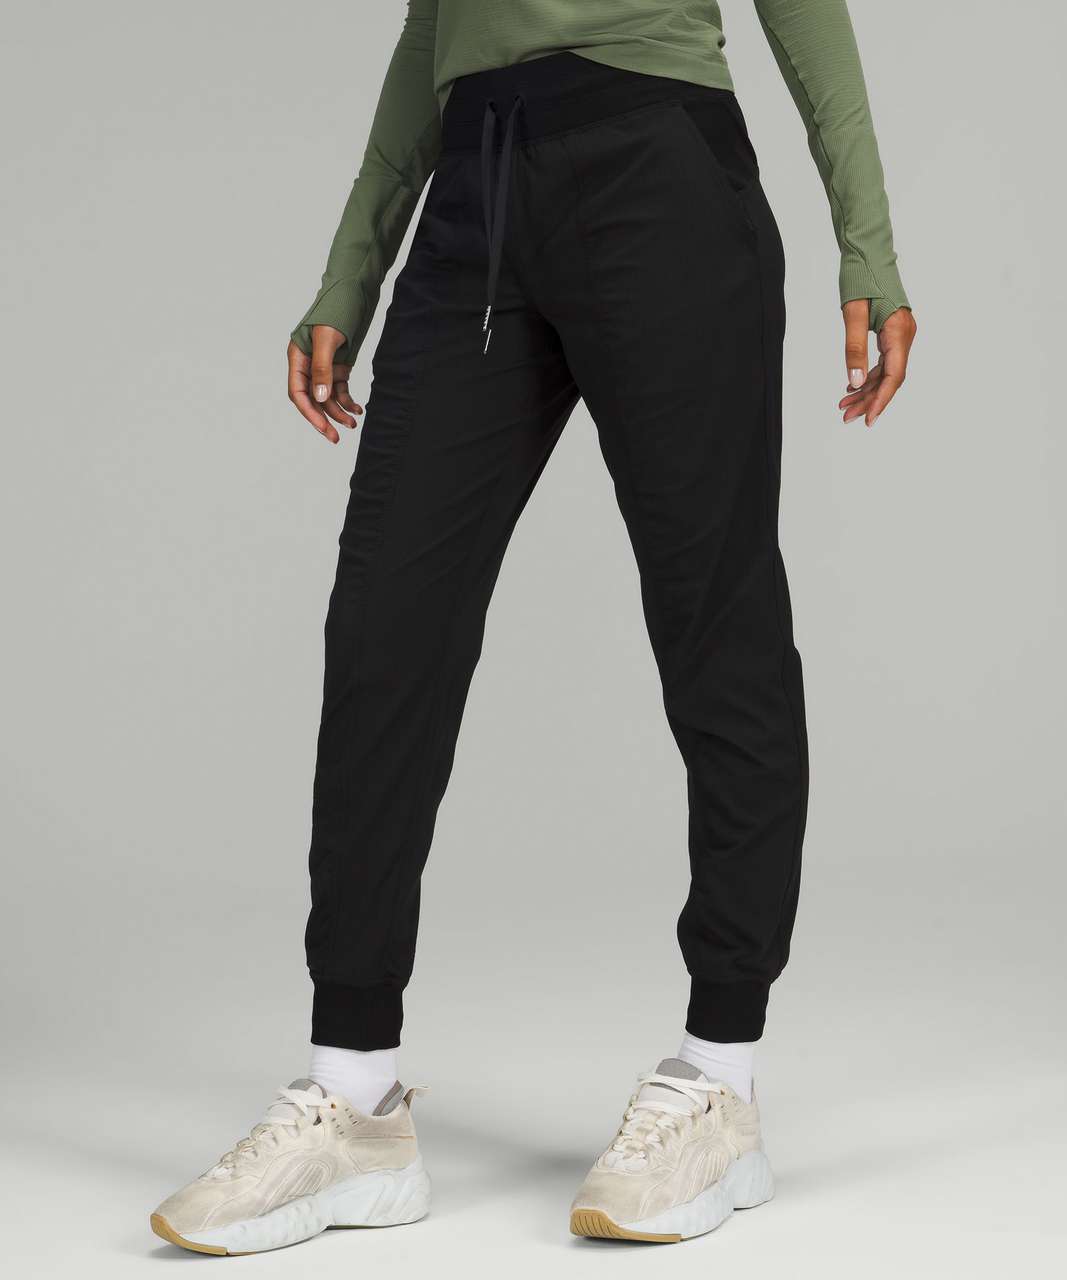 Lululemon Dance Studio Jogger Black Size 12 - $77 (21% Off Retail) New With  Tags - From Sophia